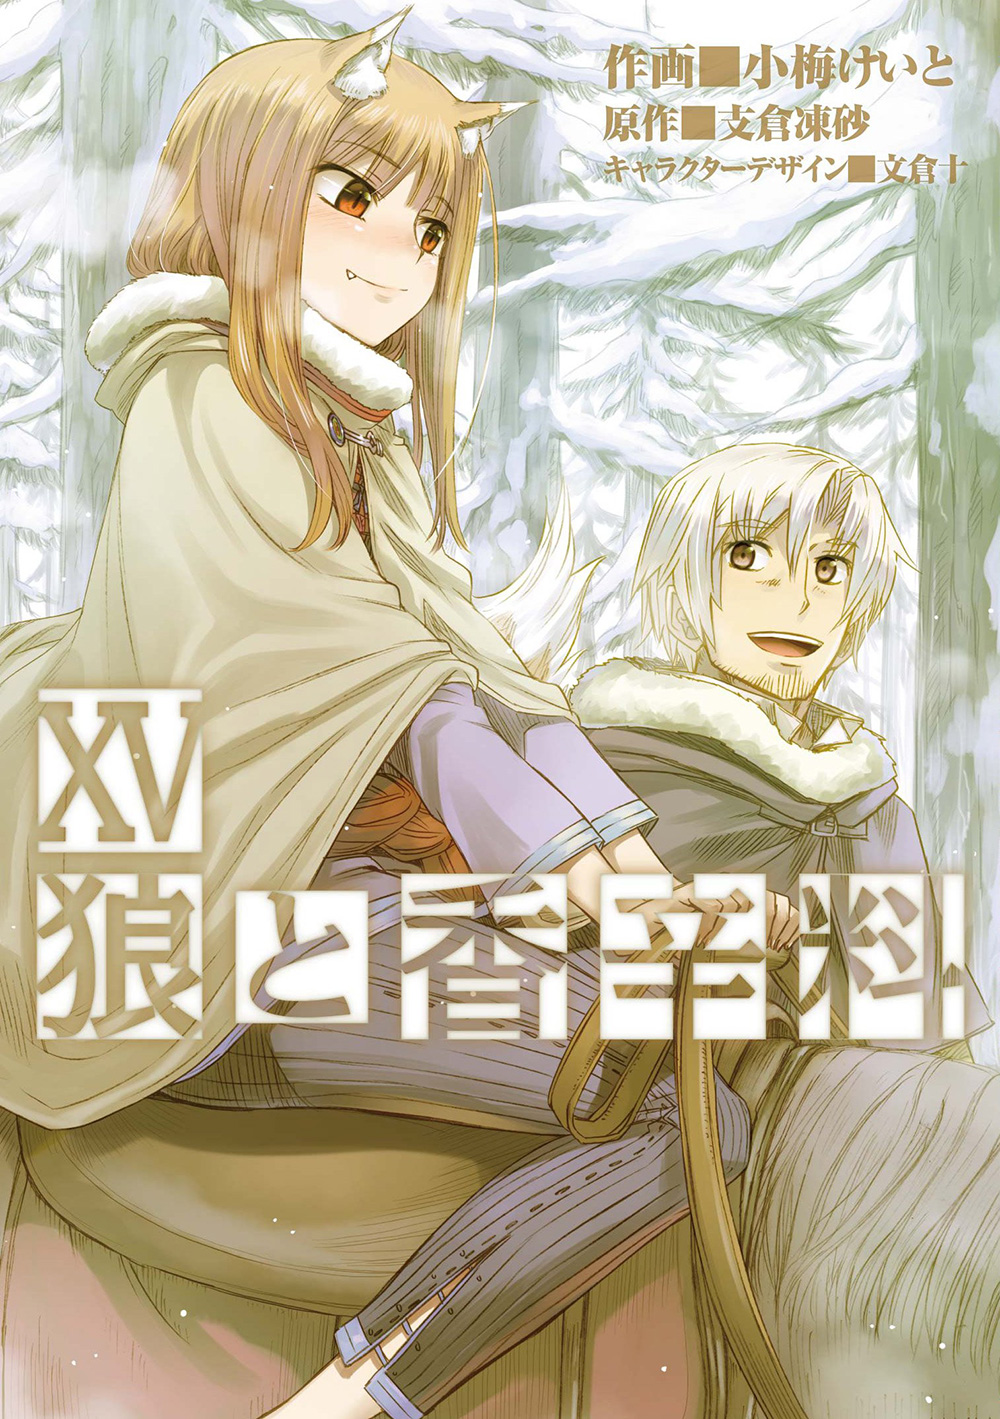 Spice-and-Wolf-Manga-Vol-15-Cover